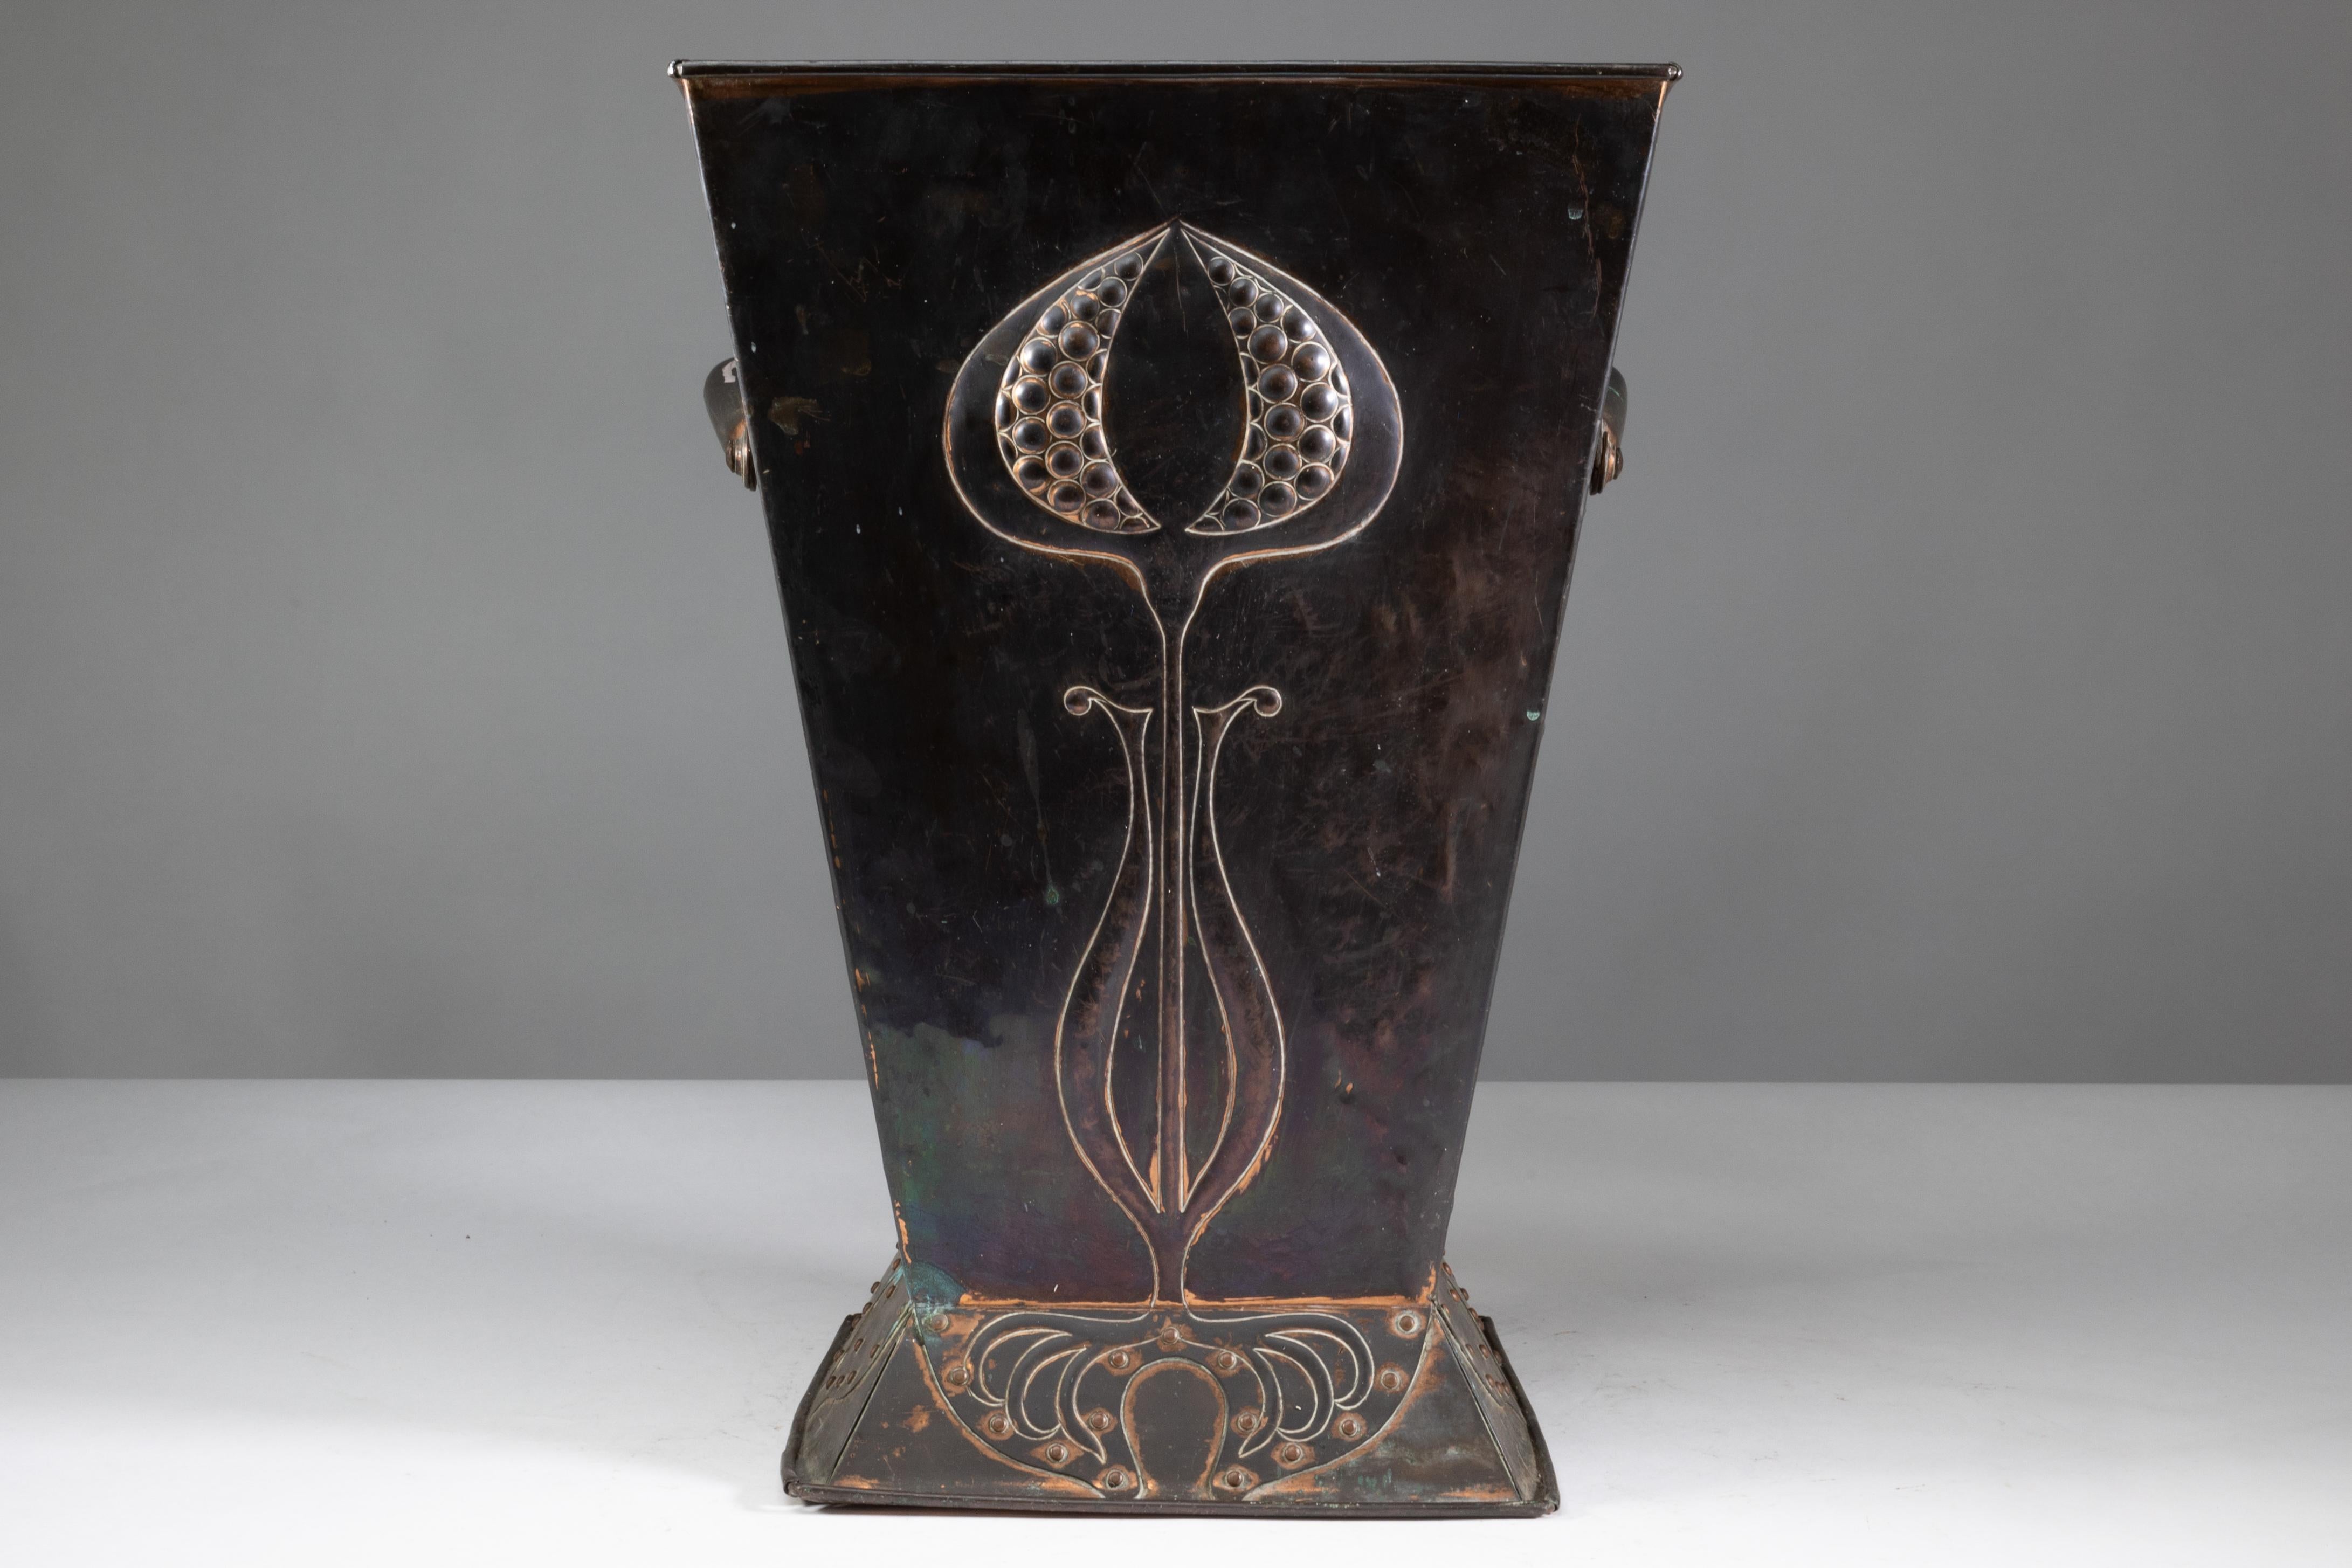 Robert Hilton for Hilton Ware. 
An impressive Arts and Crafts copper coal bucket with a single flowering seed pod, the roots of which are of blind riveted fretwork to the base. The sides with similar riveted decoration to the base, flowing up with